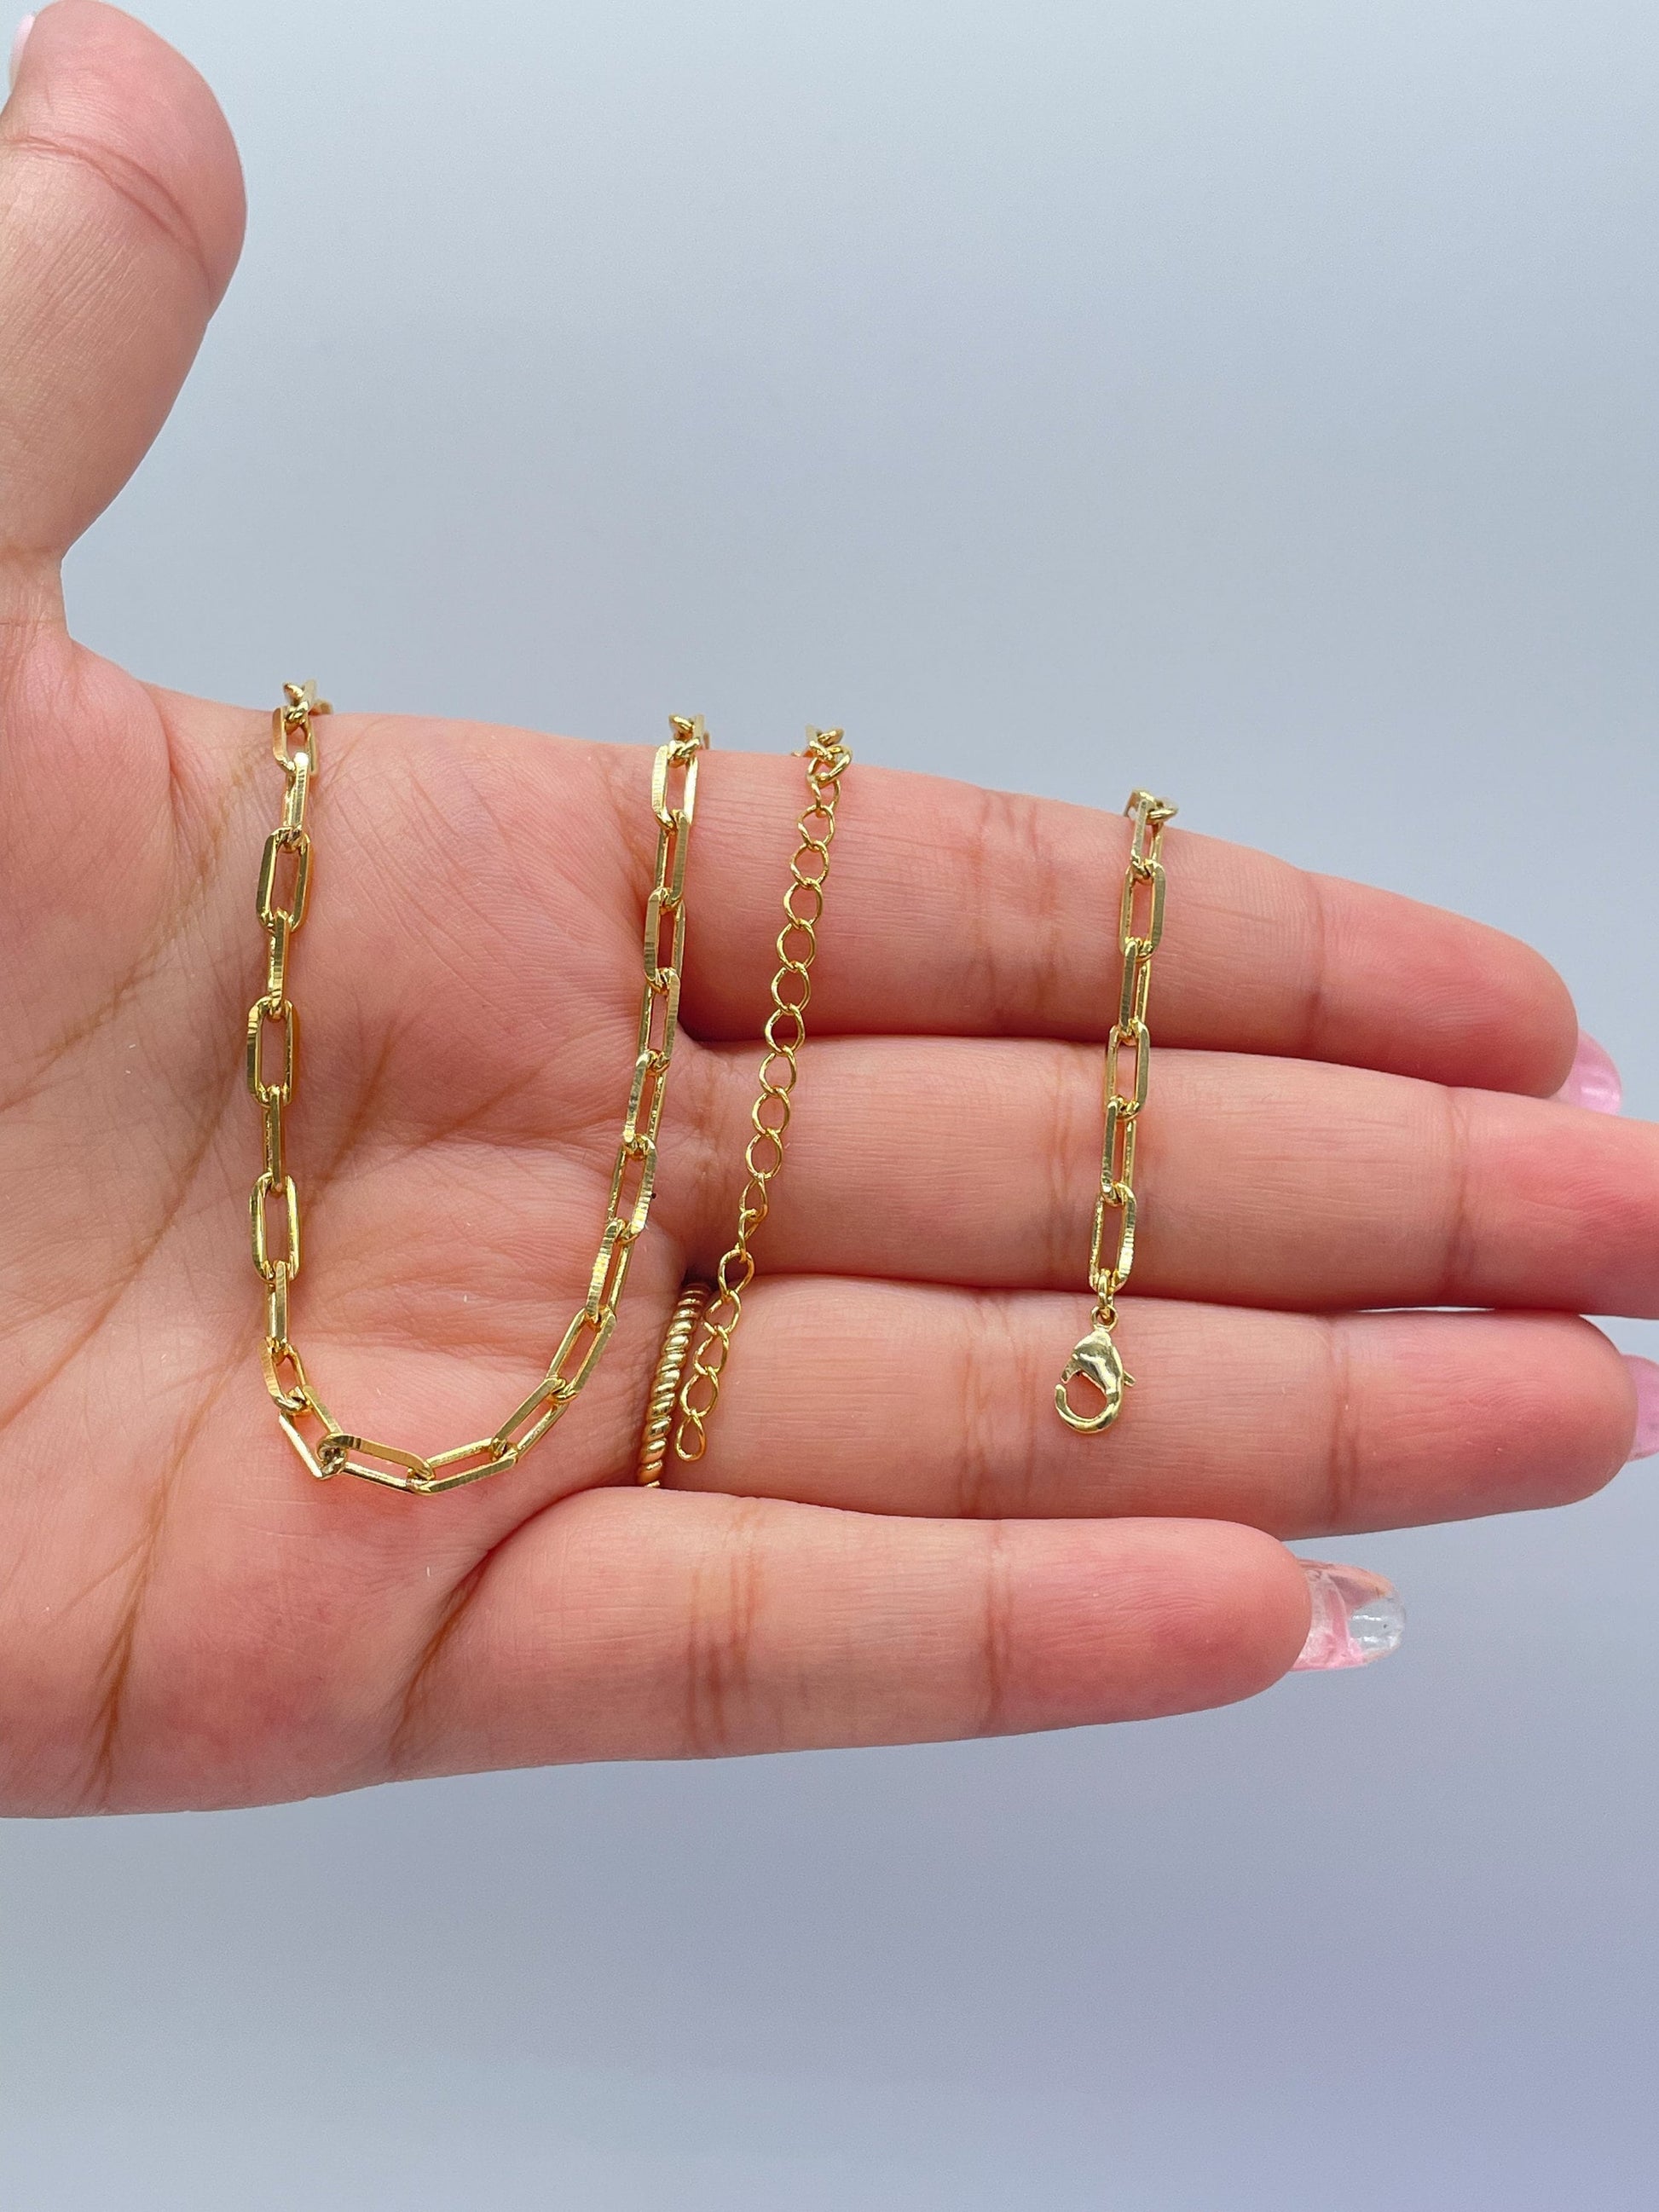 18k Gold Filled 16 Inch, 3.5mm Thick, Paper Clip Chain Necklace Supplies Creative, Simplistic Piece, Minimalistic Jewlery